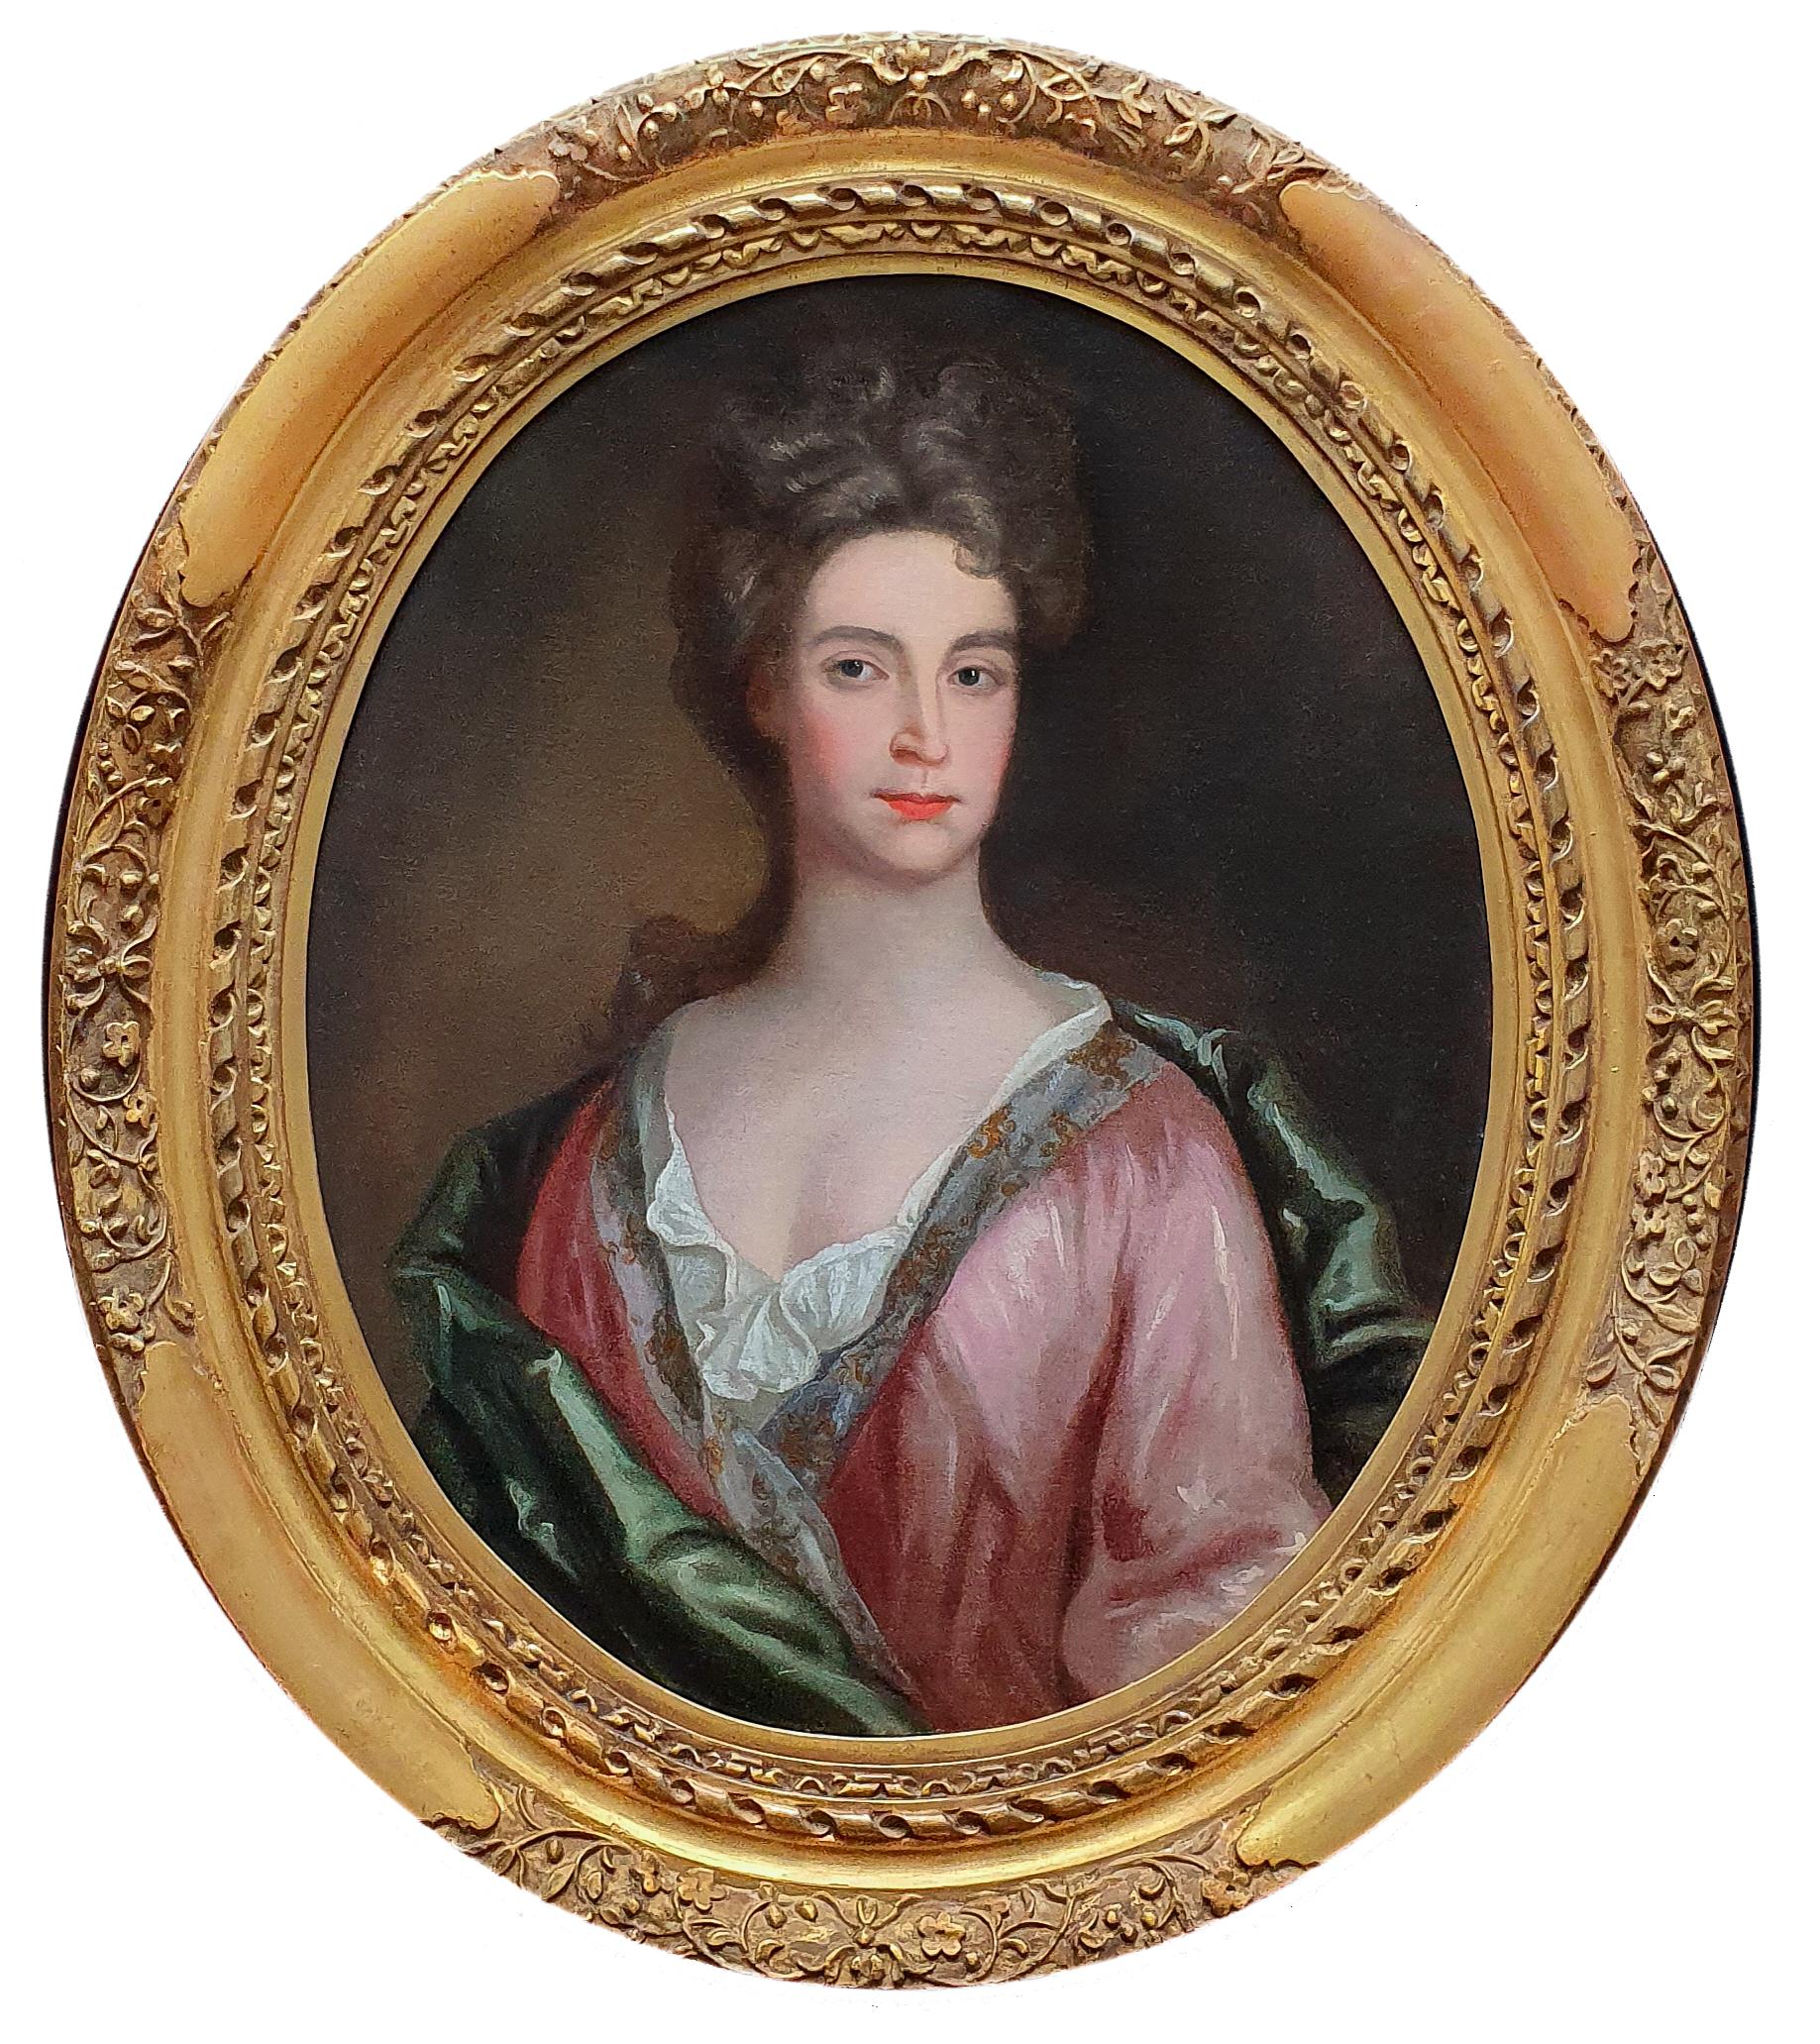 Portrait of a Lady in a Pink Dress and Green Wrap c.1695, Antique Oil Painting